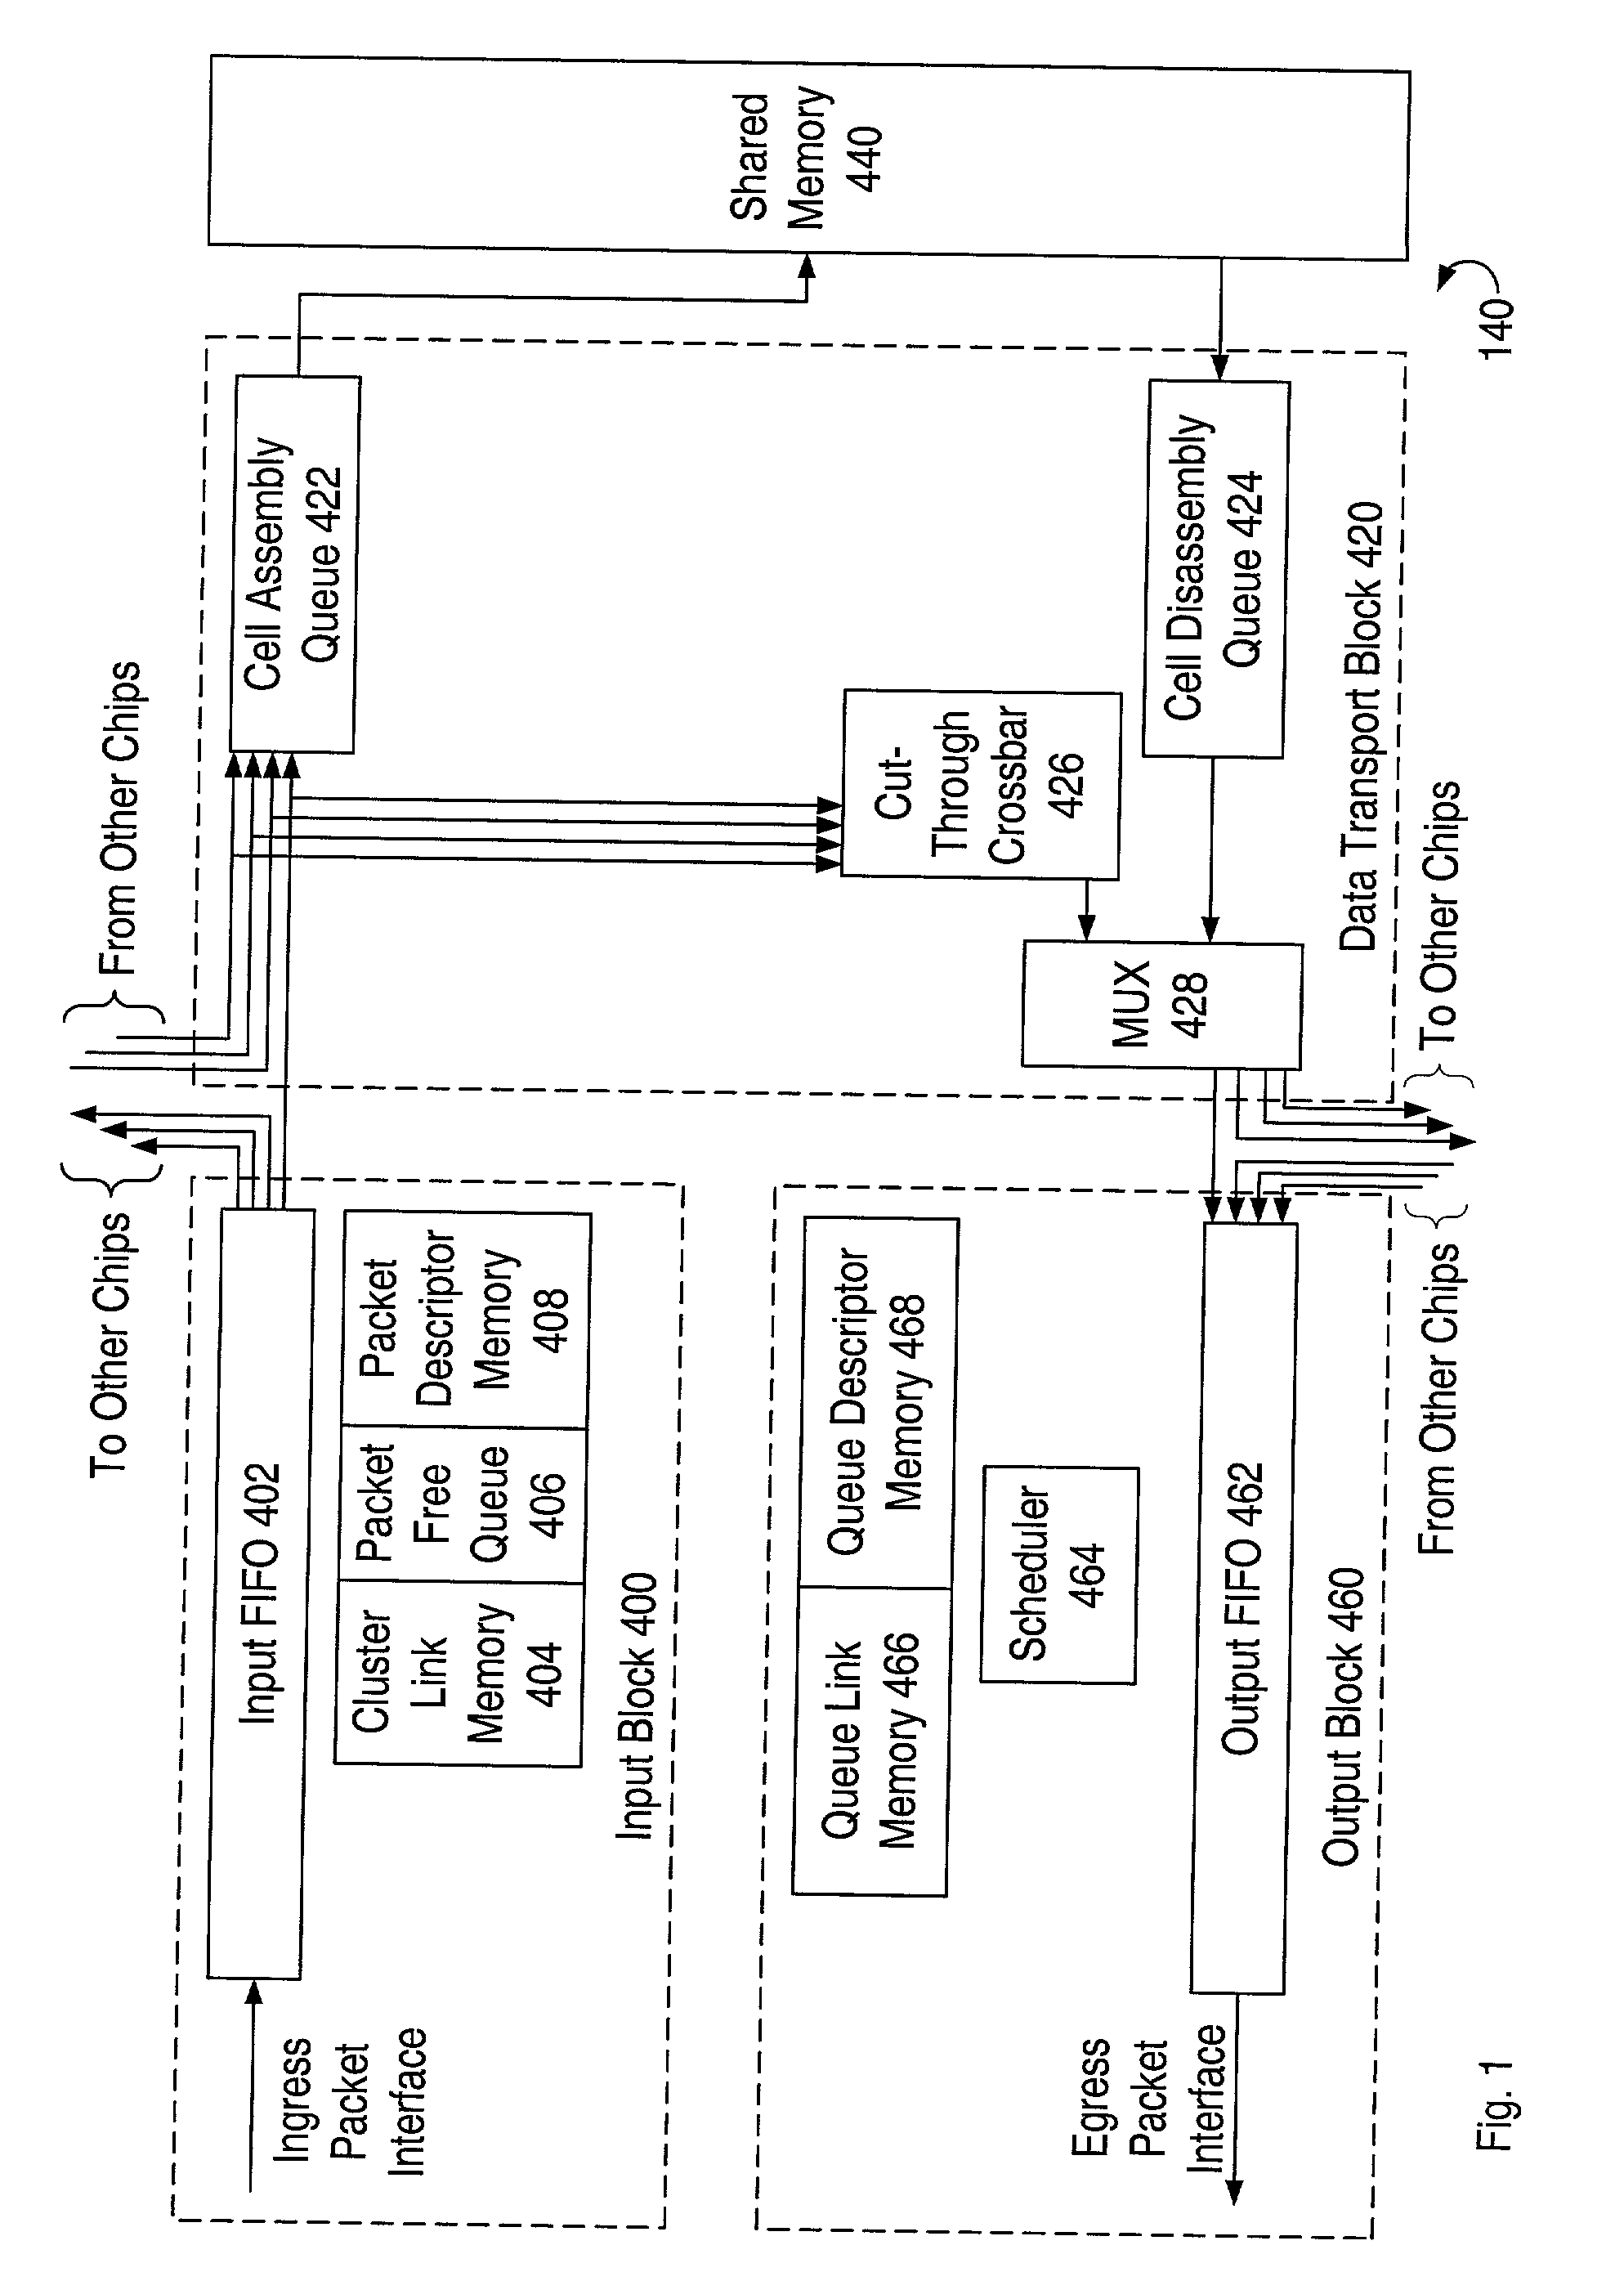 Packet input thresholding for resource distribution in a network switch